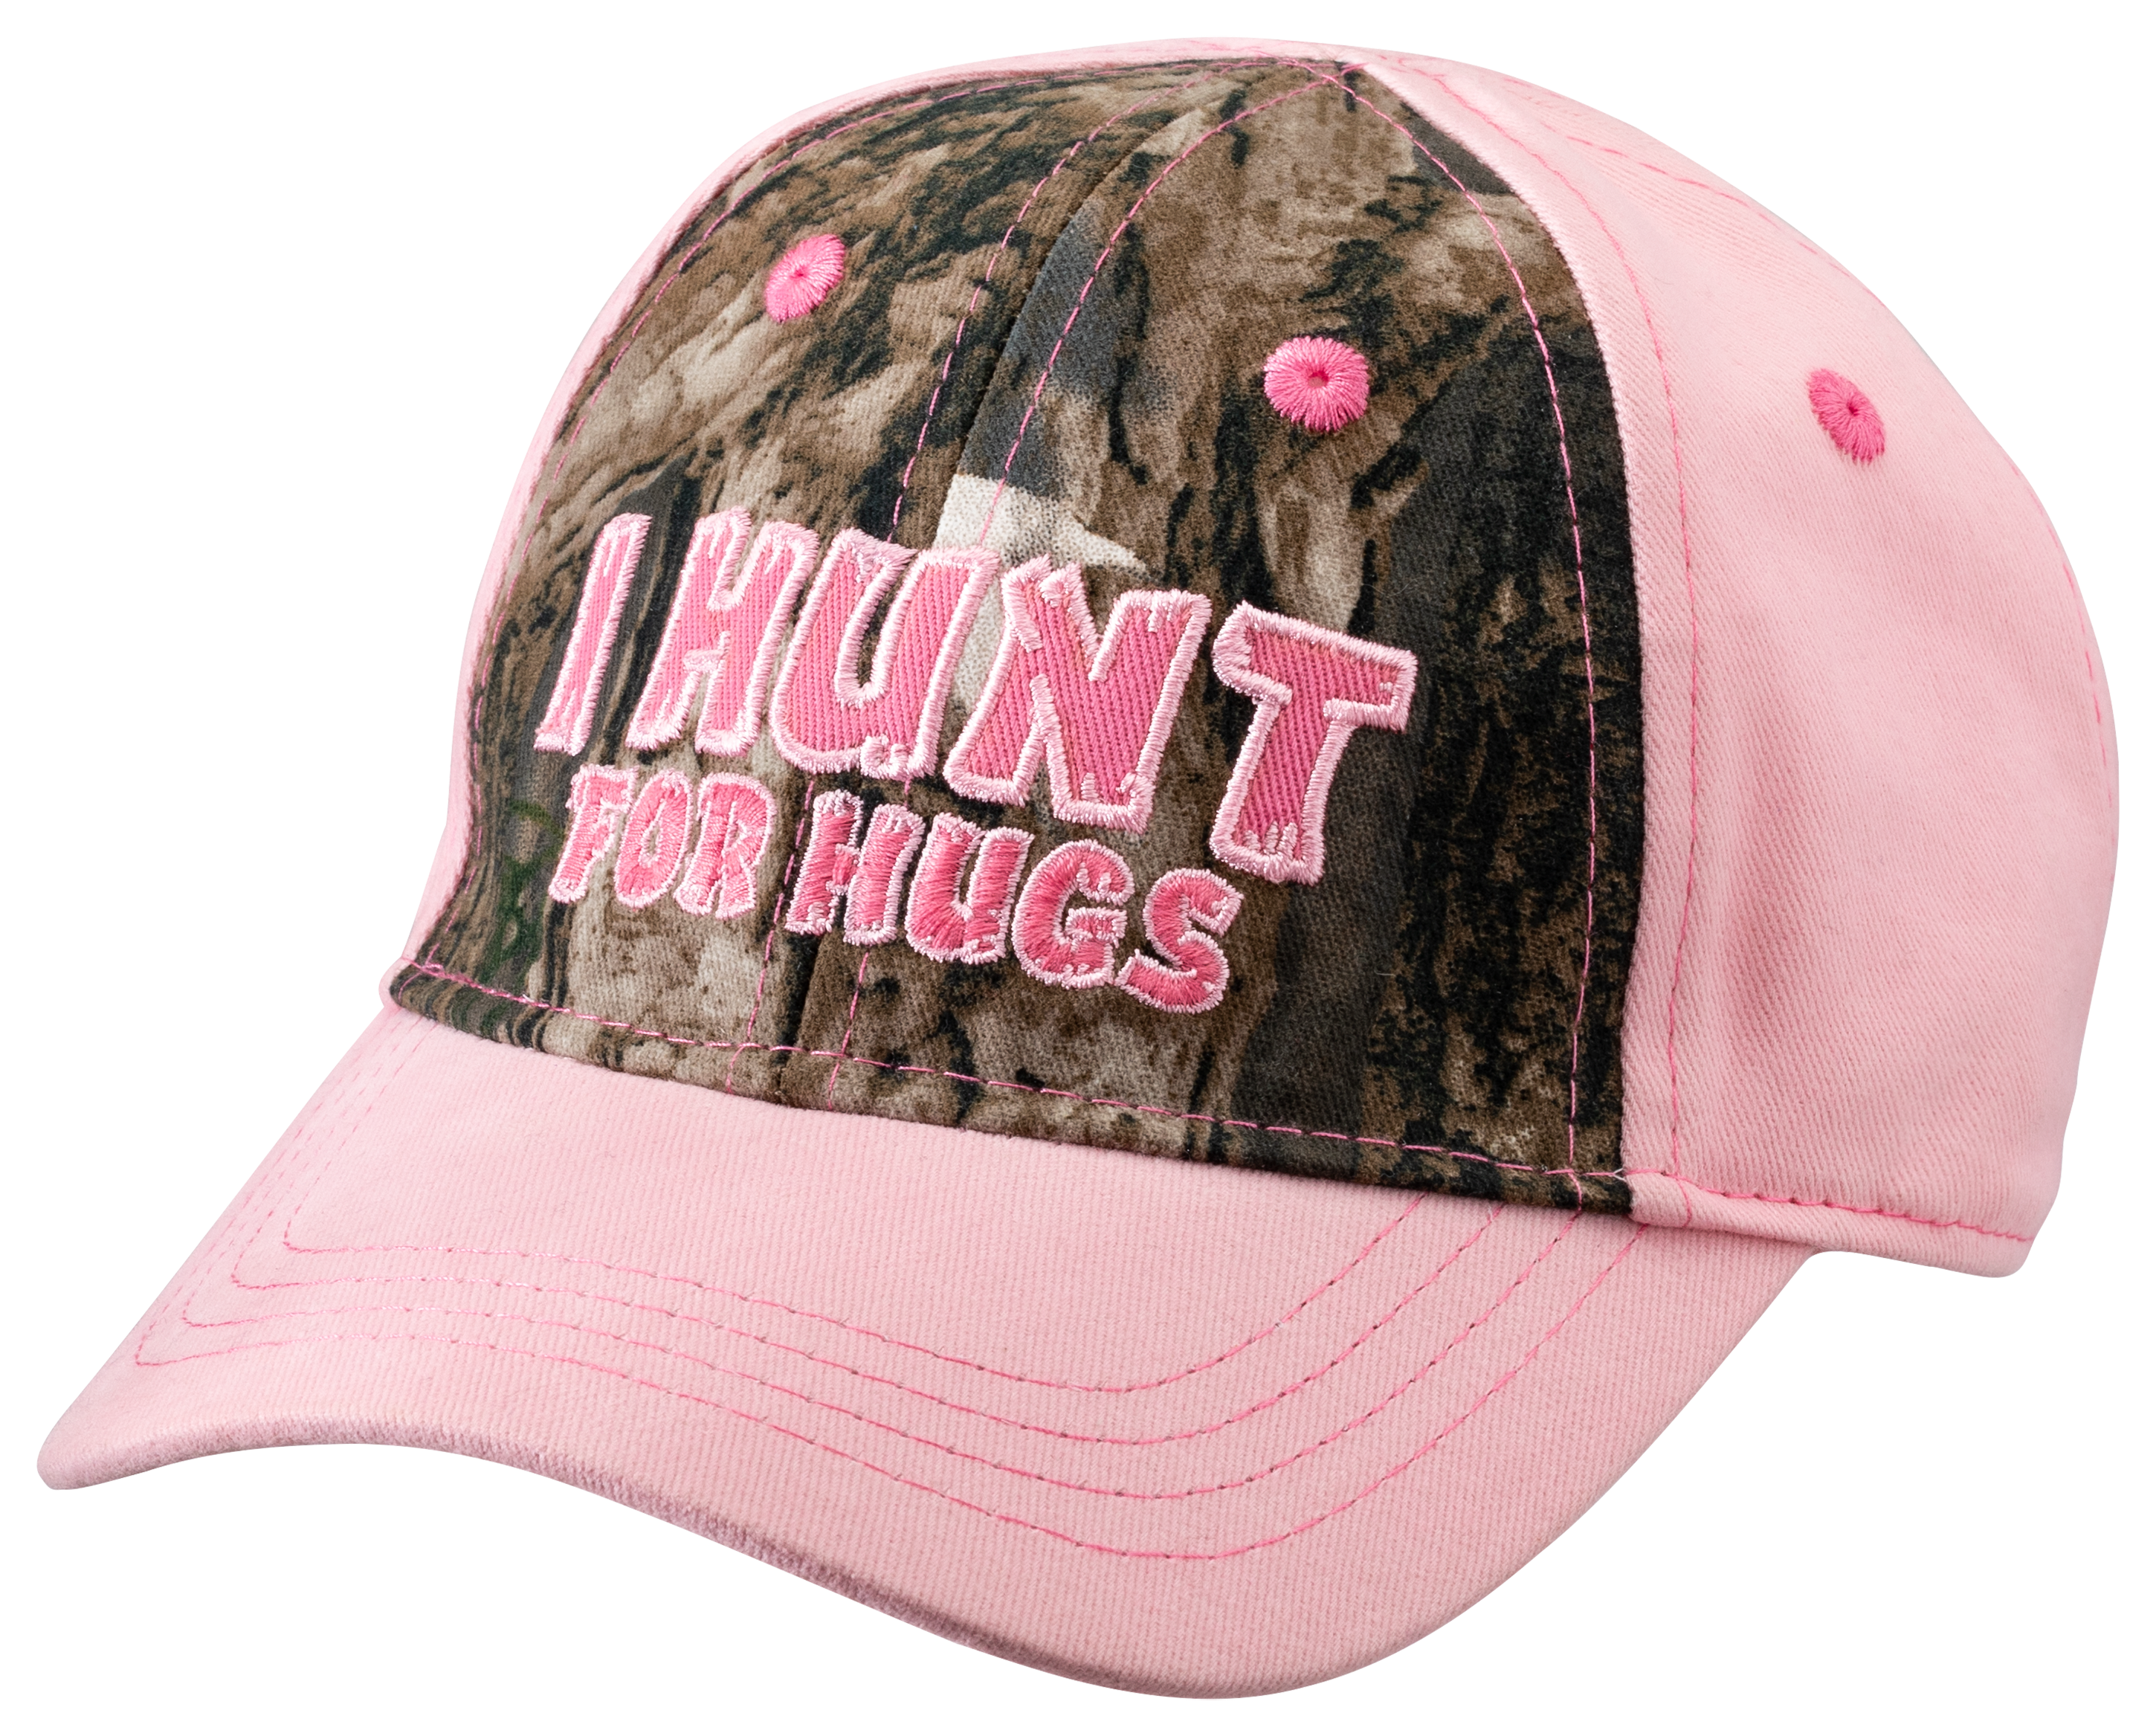 Bass Pro Shops I Hunt for Hugs Cap for Babies or Toddlers | Bass Pro Shops